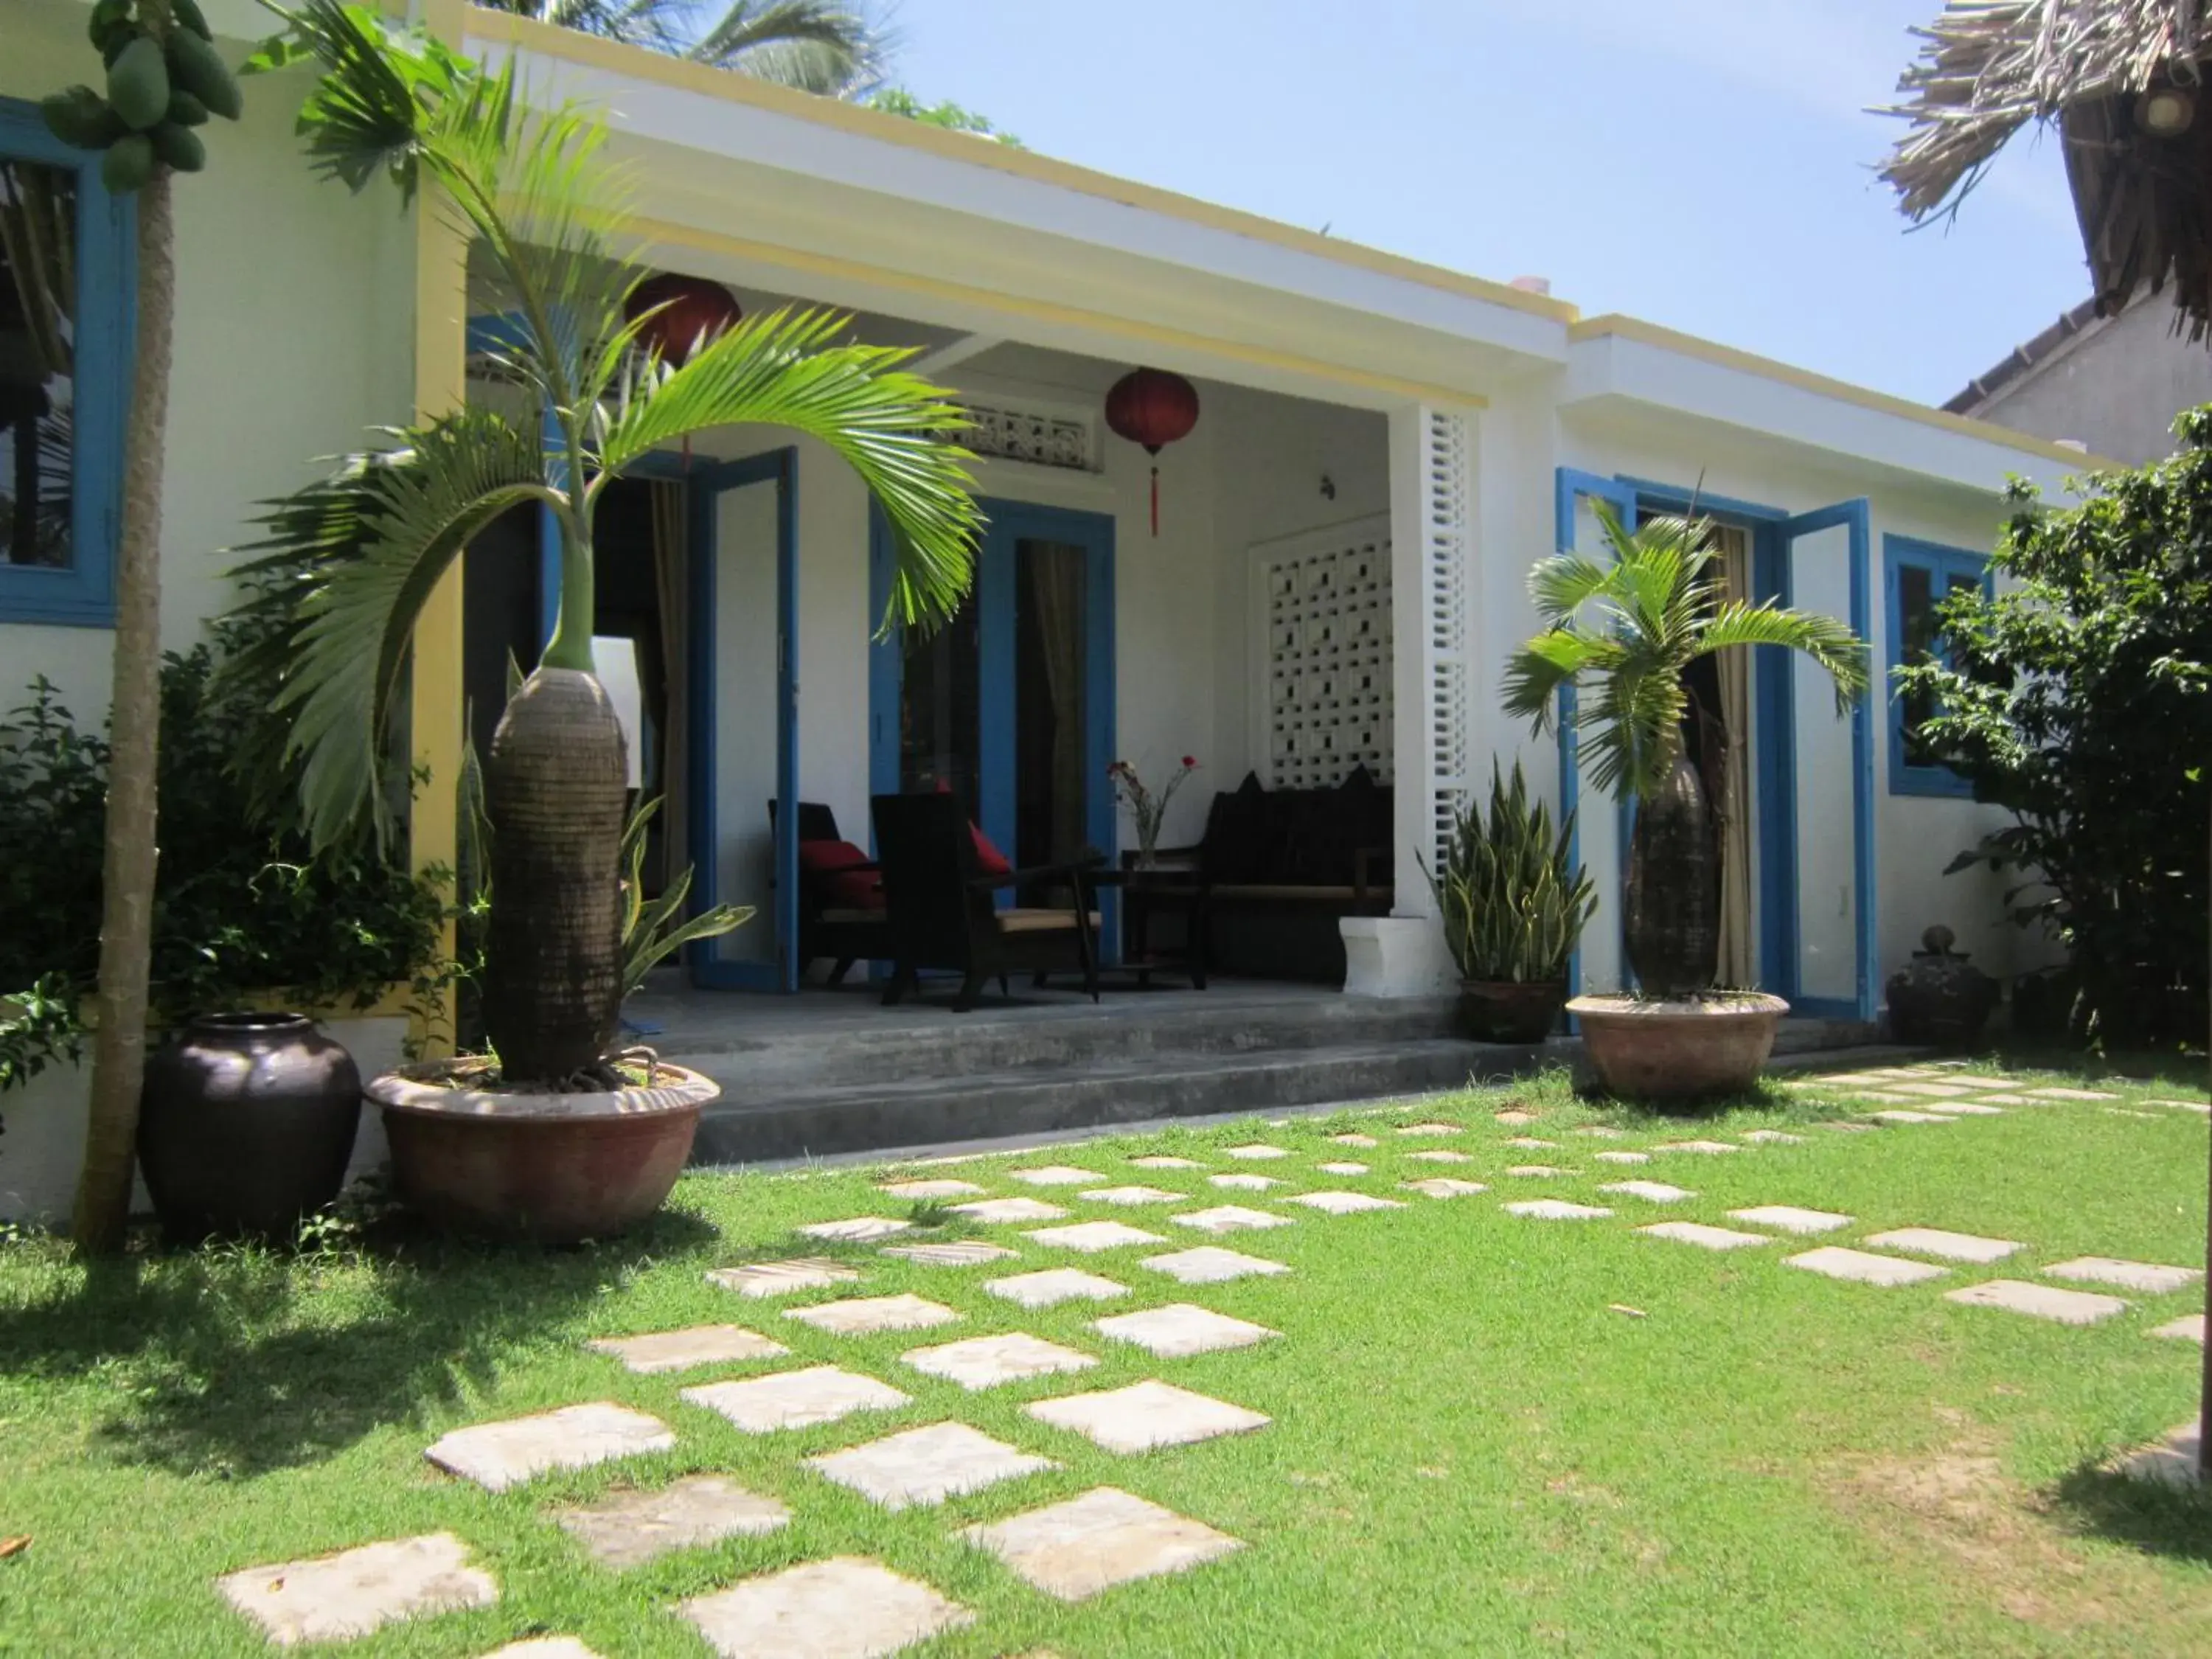 Property building in Local Beach Homestay